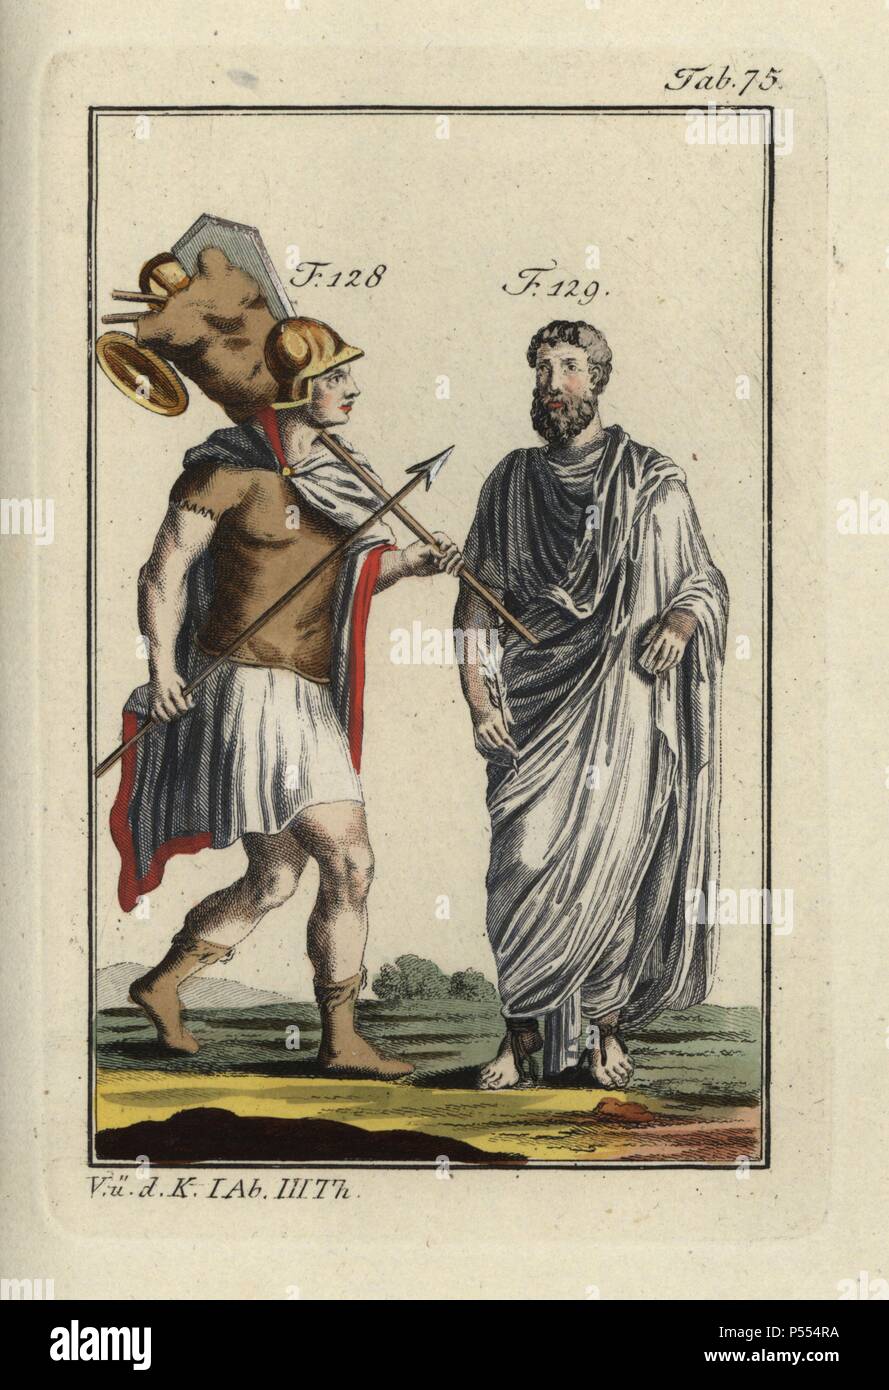 Emperor Romulus Augustus in battledress carrying the Spolia Opima (rich spoils), and a Roman consul. Handcolored copperplate engraving from Robert von Spalart's 'Historical Picture of the Costumes of the Principal People of Antiquity and of the Middle Ages' (1798). Stock Photo